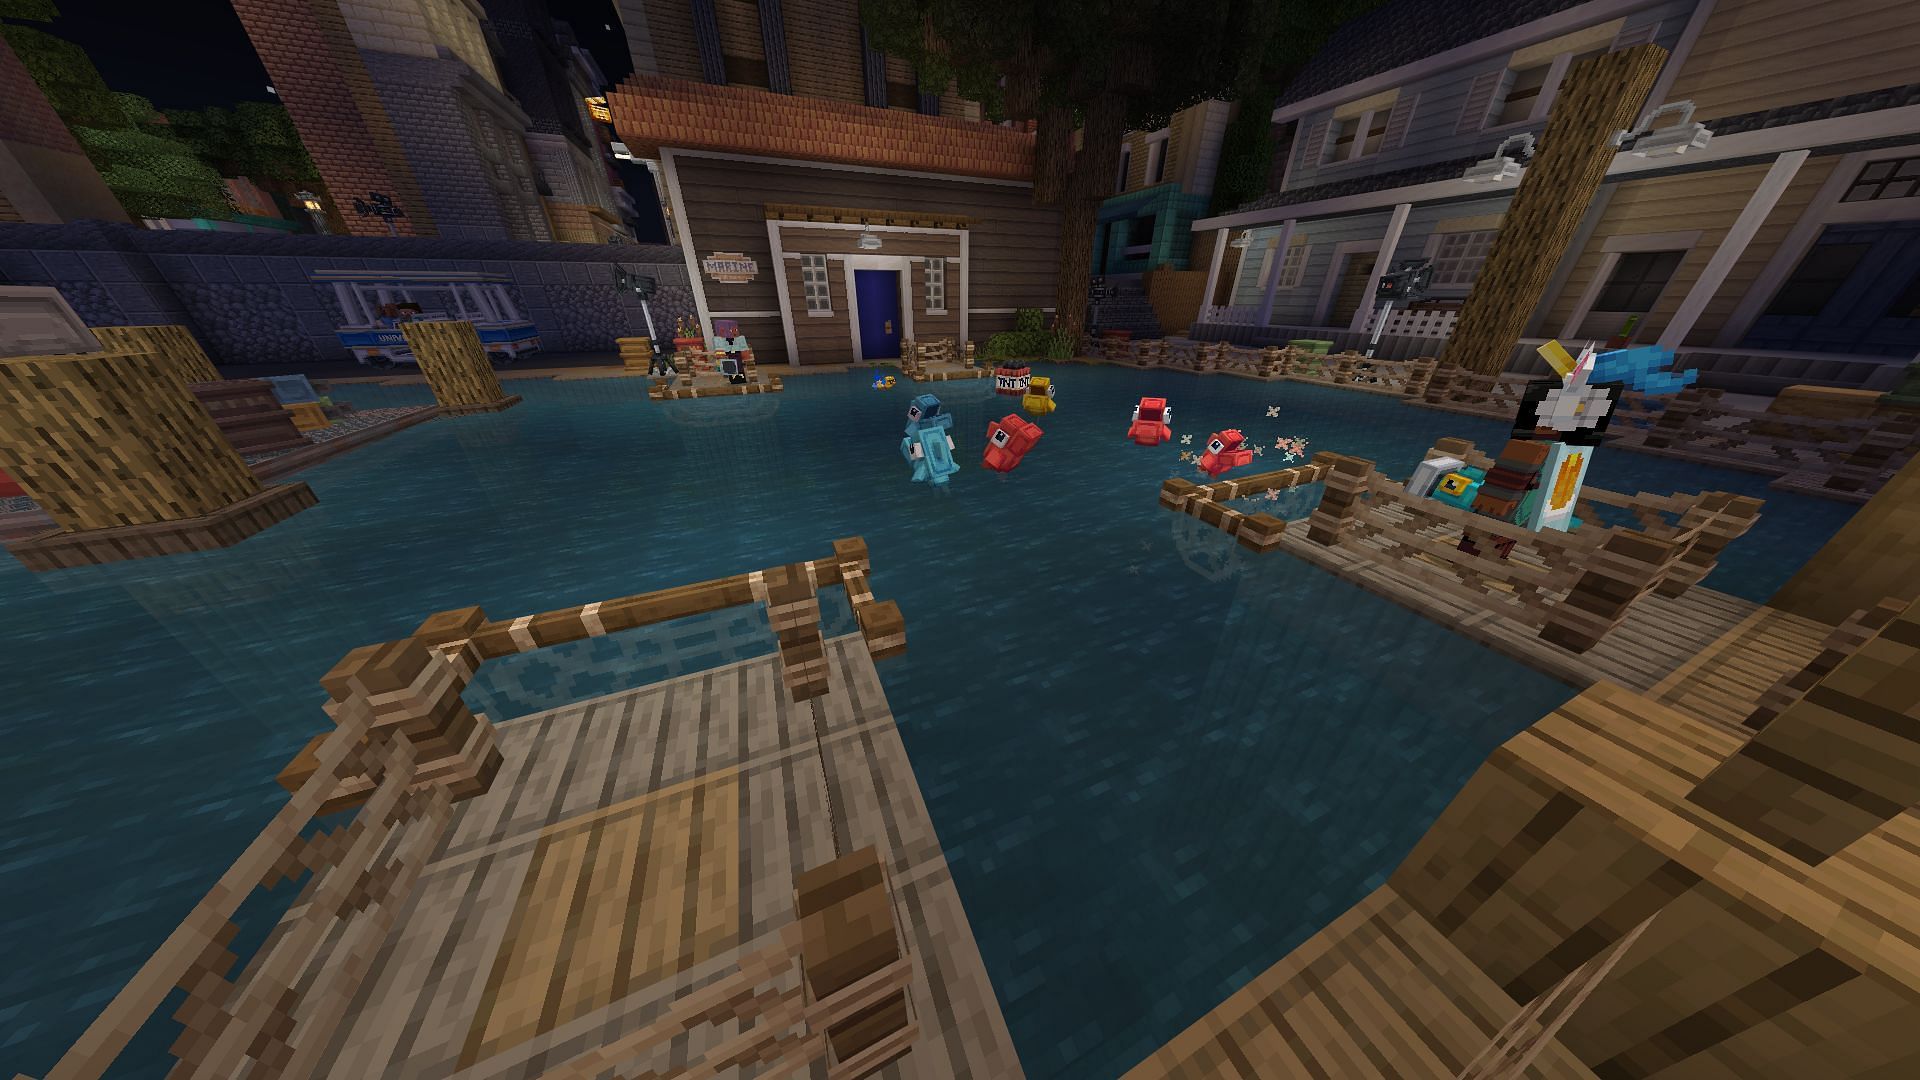 Scoop up as many fish as possible in this Minecraft Universal Studios event minigame! (Image via Mojang)